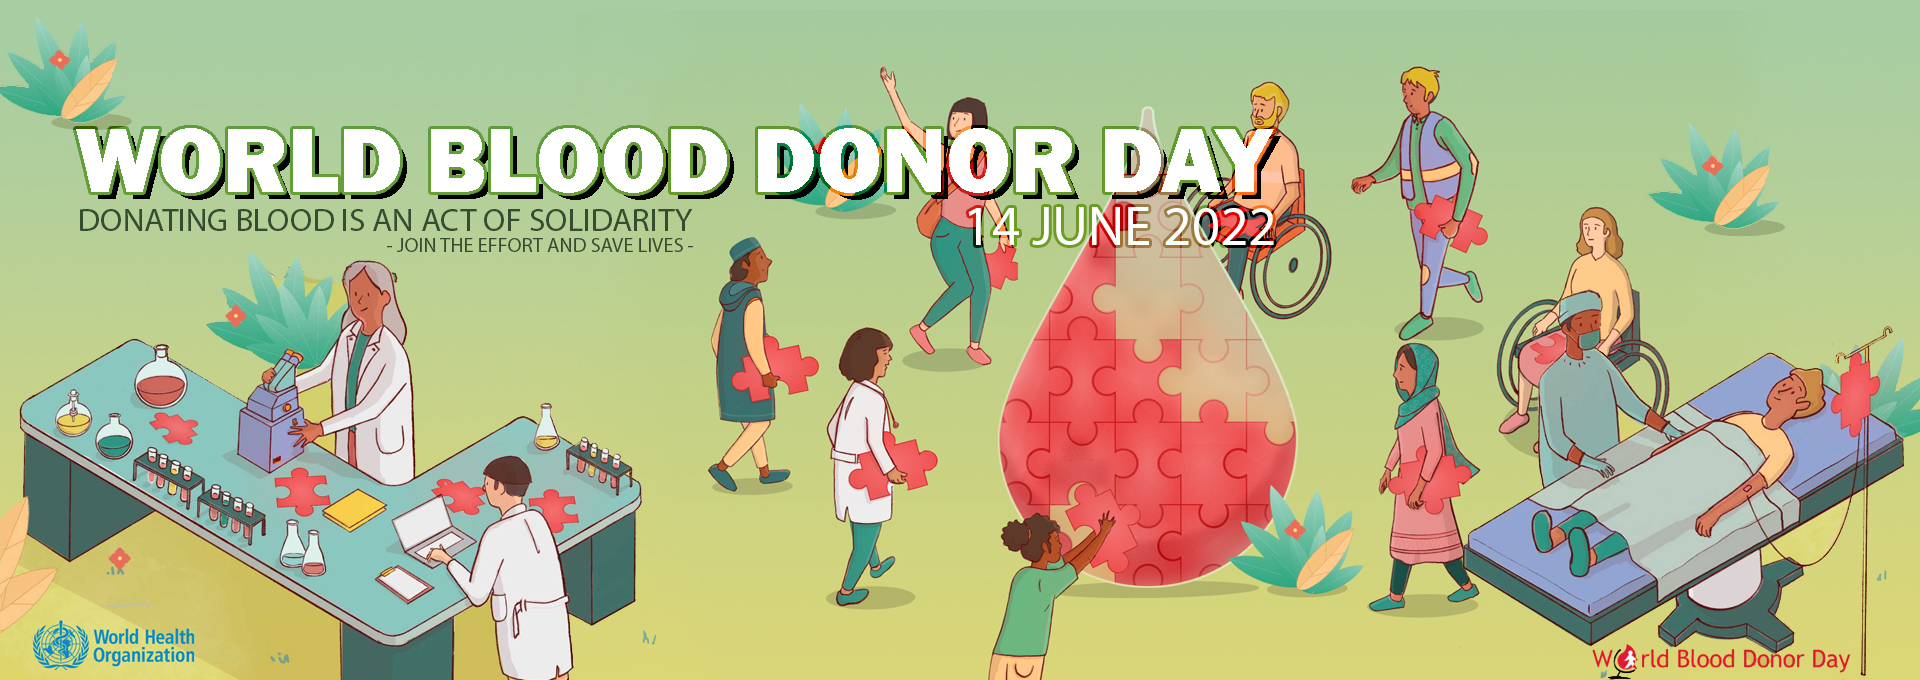 world blood donor day 2022